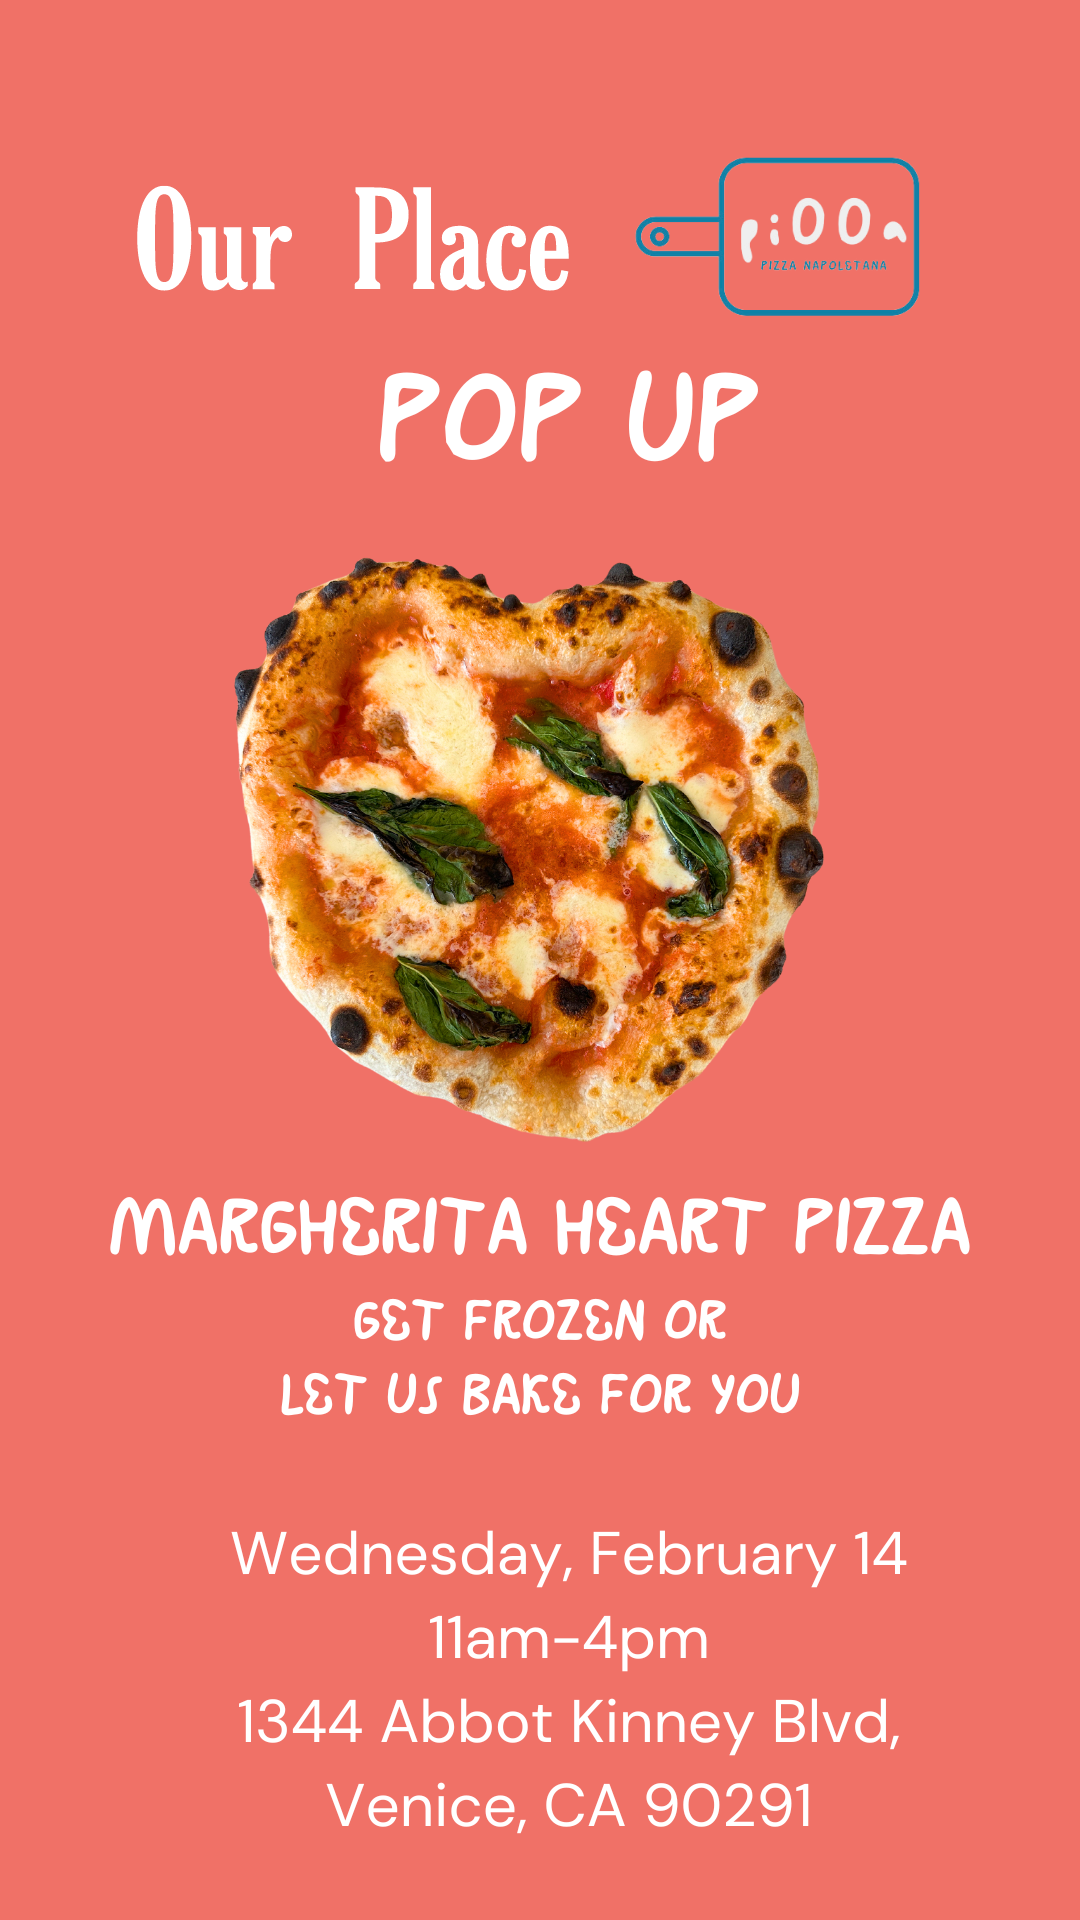 piooa popping up at our place located on abbot kinney in venice for a heart shaped margherita pizza pop up event